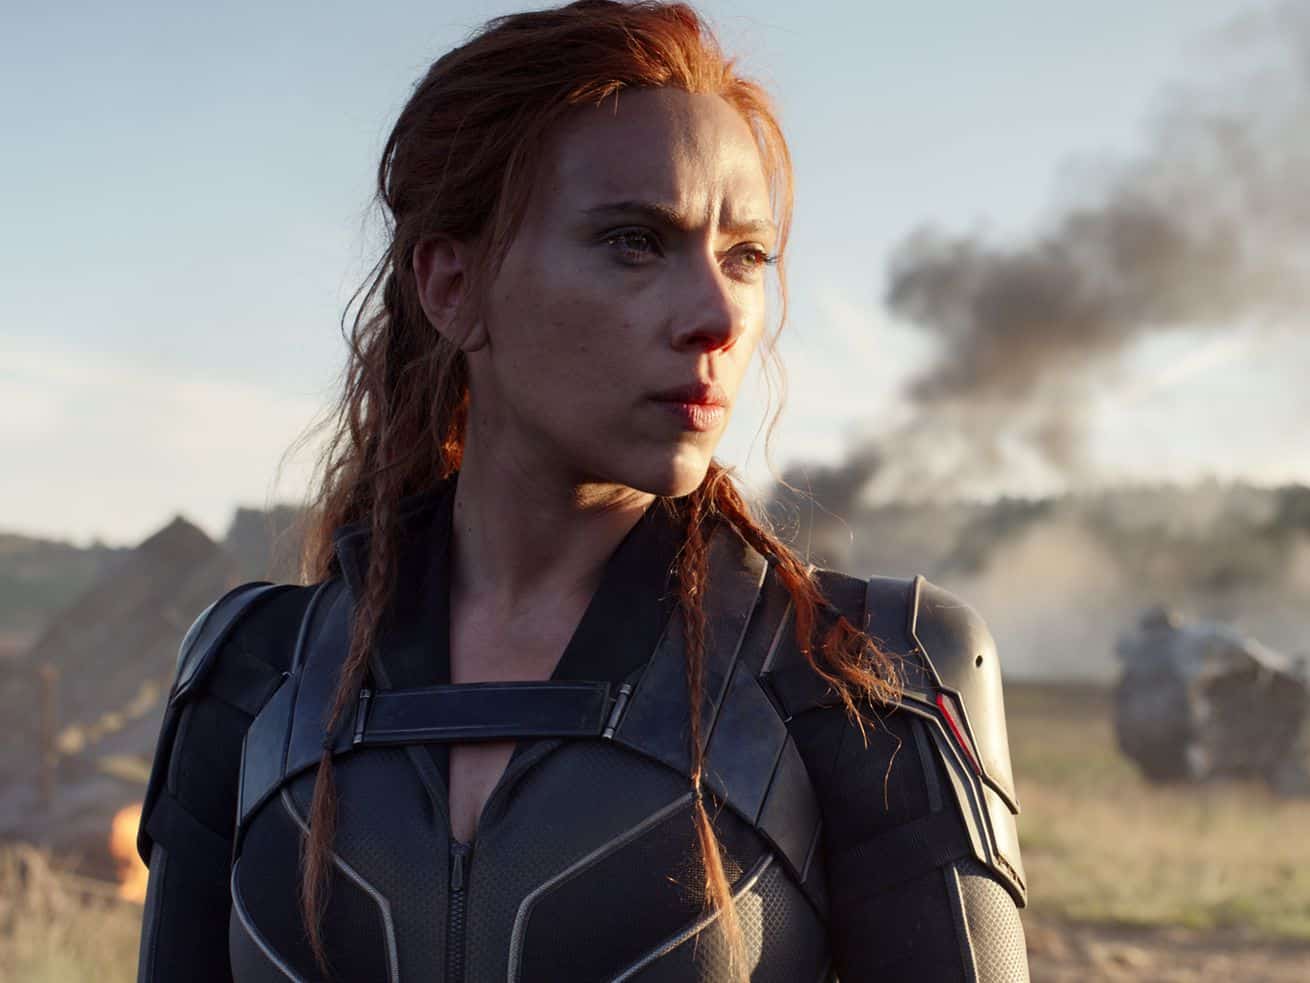 Black Widow gives the character a soul — several years too late